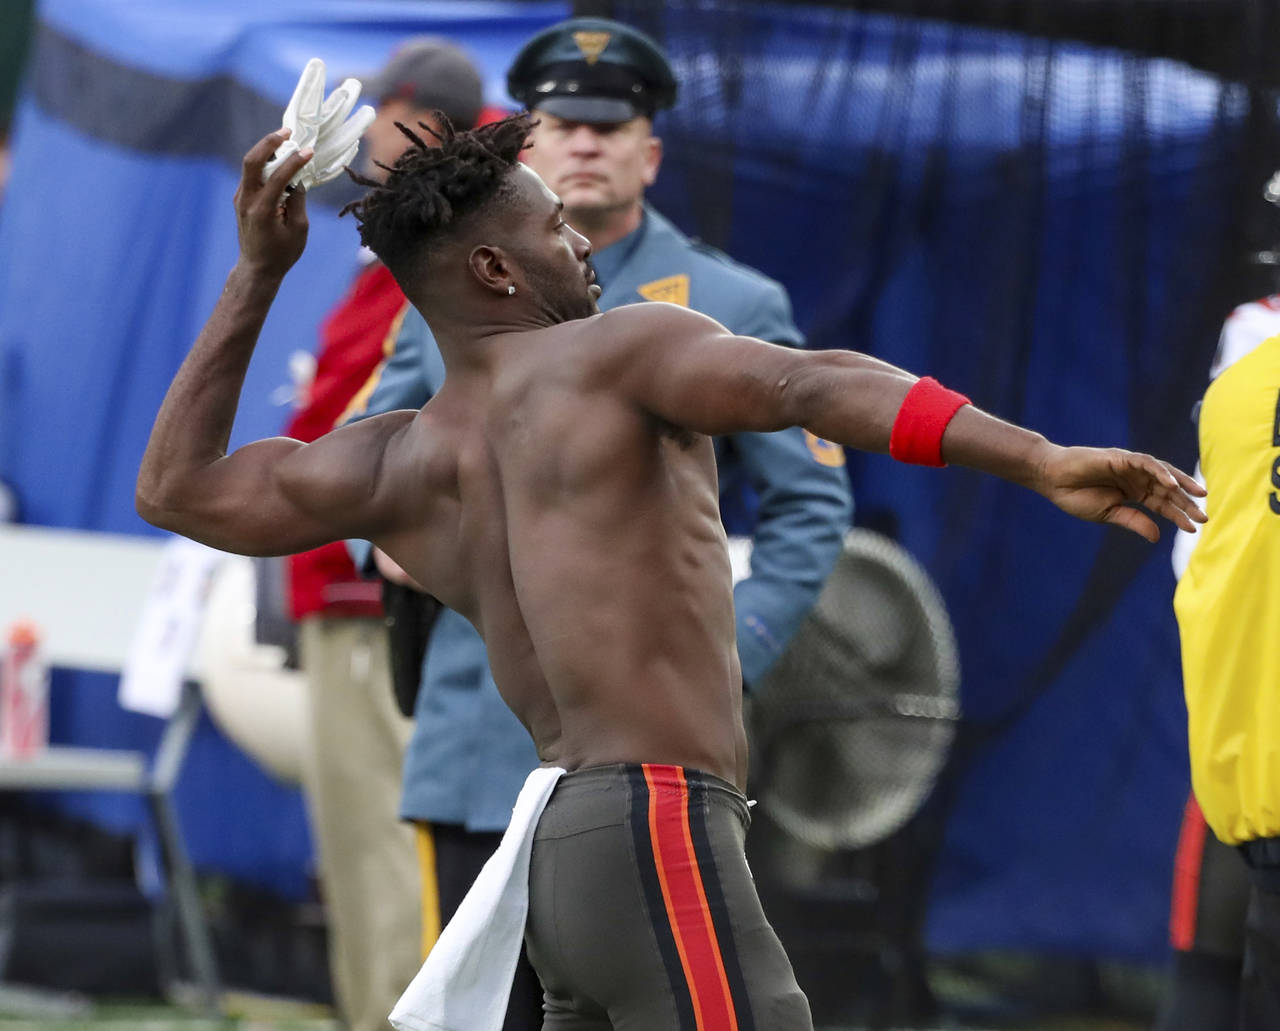 A N.J. State Police trooper, background, watches as Tampa Bay Buccaneers wide receiver Antonio Brow...